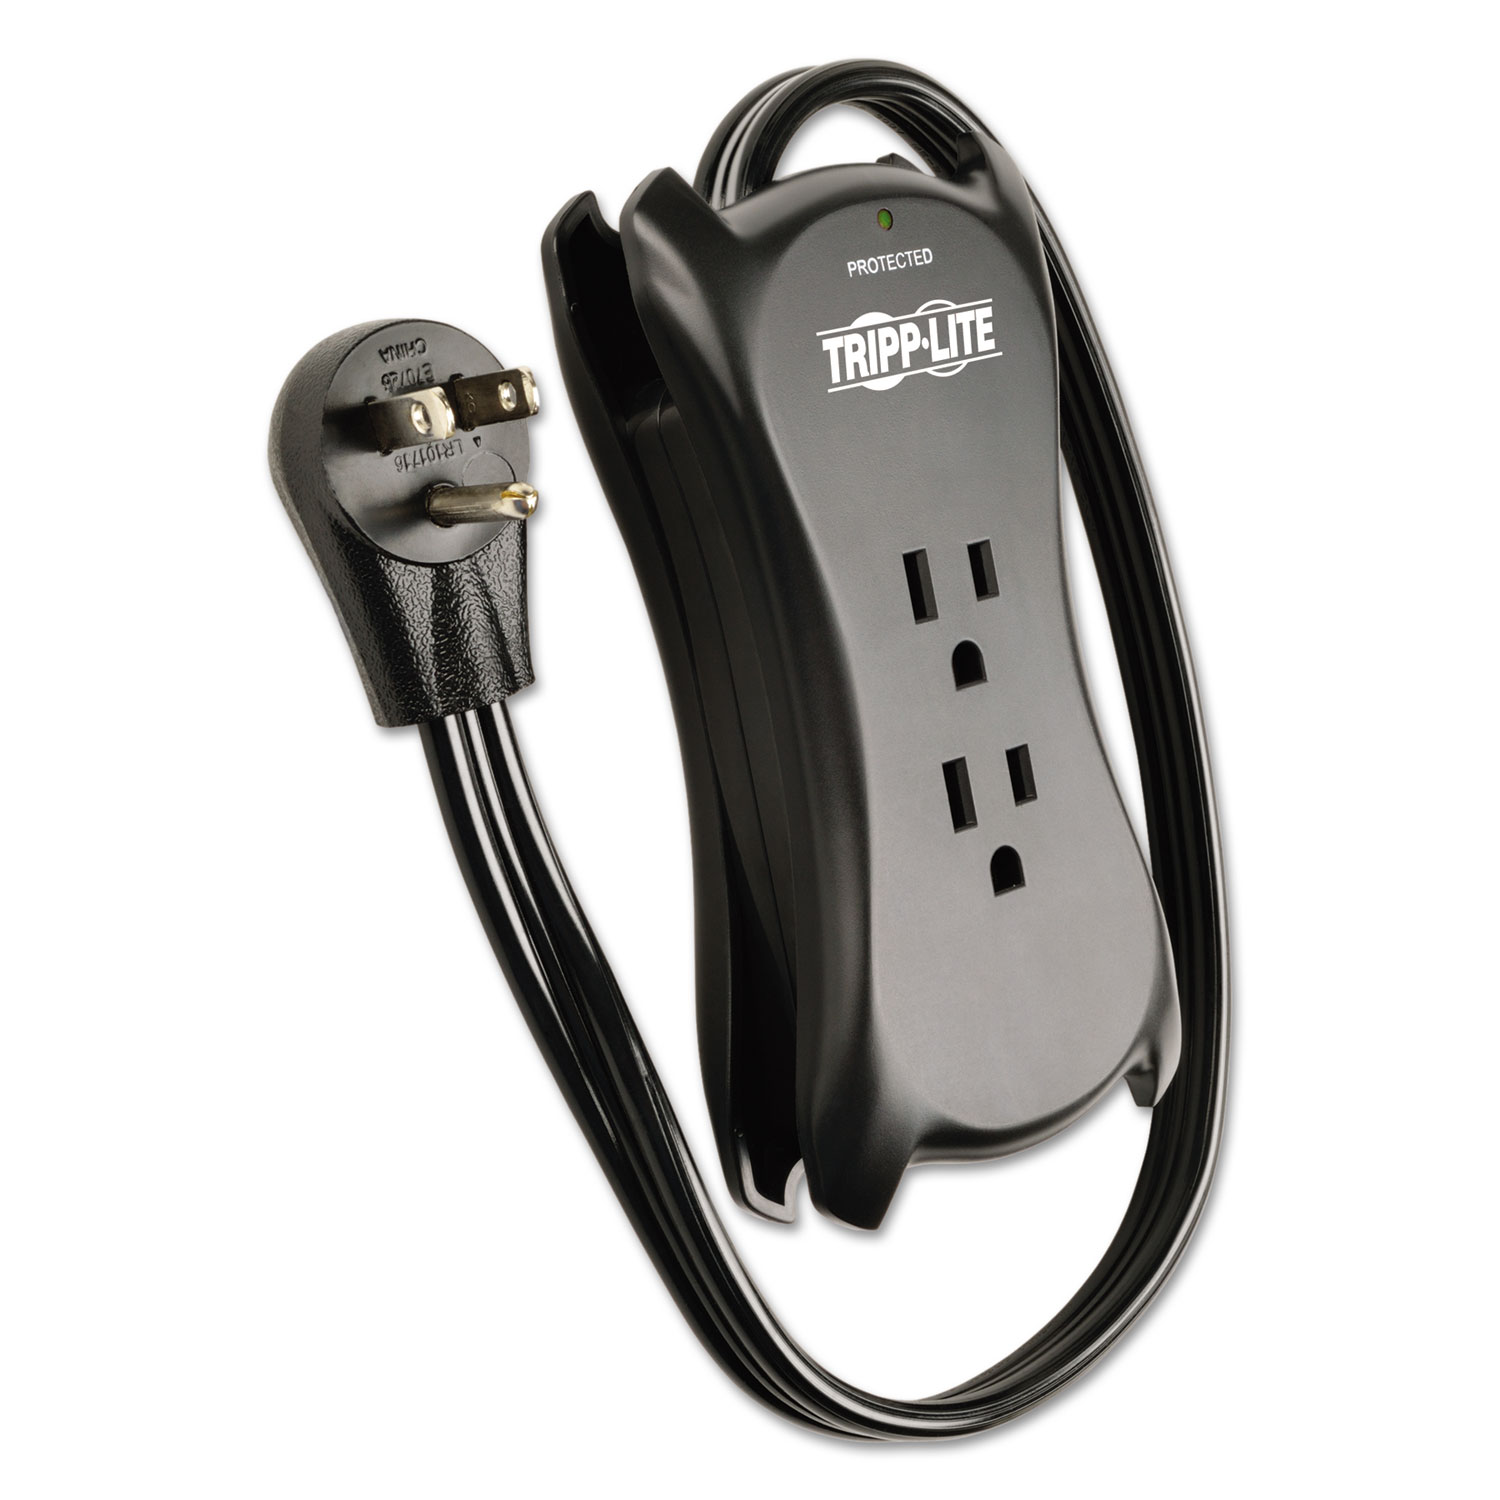 Protect It! Travel-Size Surge Protector, 3 Outlets/2 USB, 1-1/2 ft Cord, 1050 J